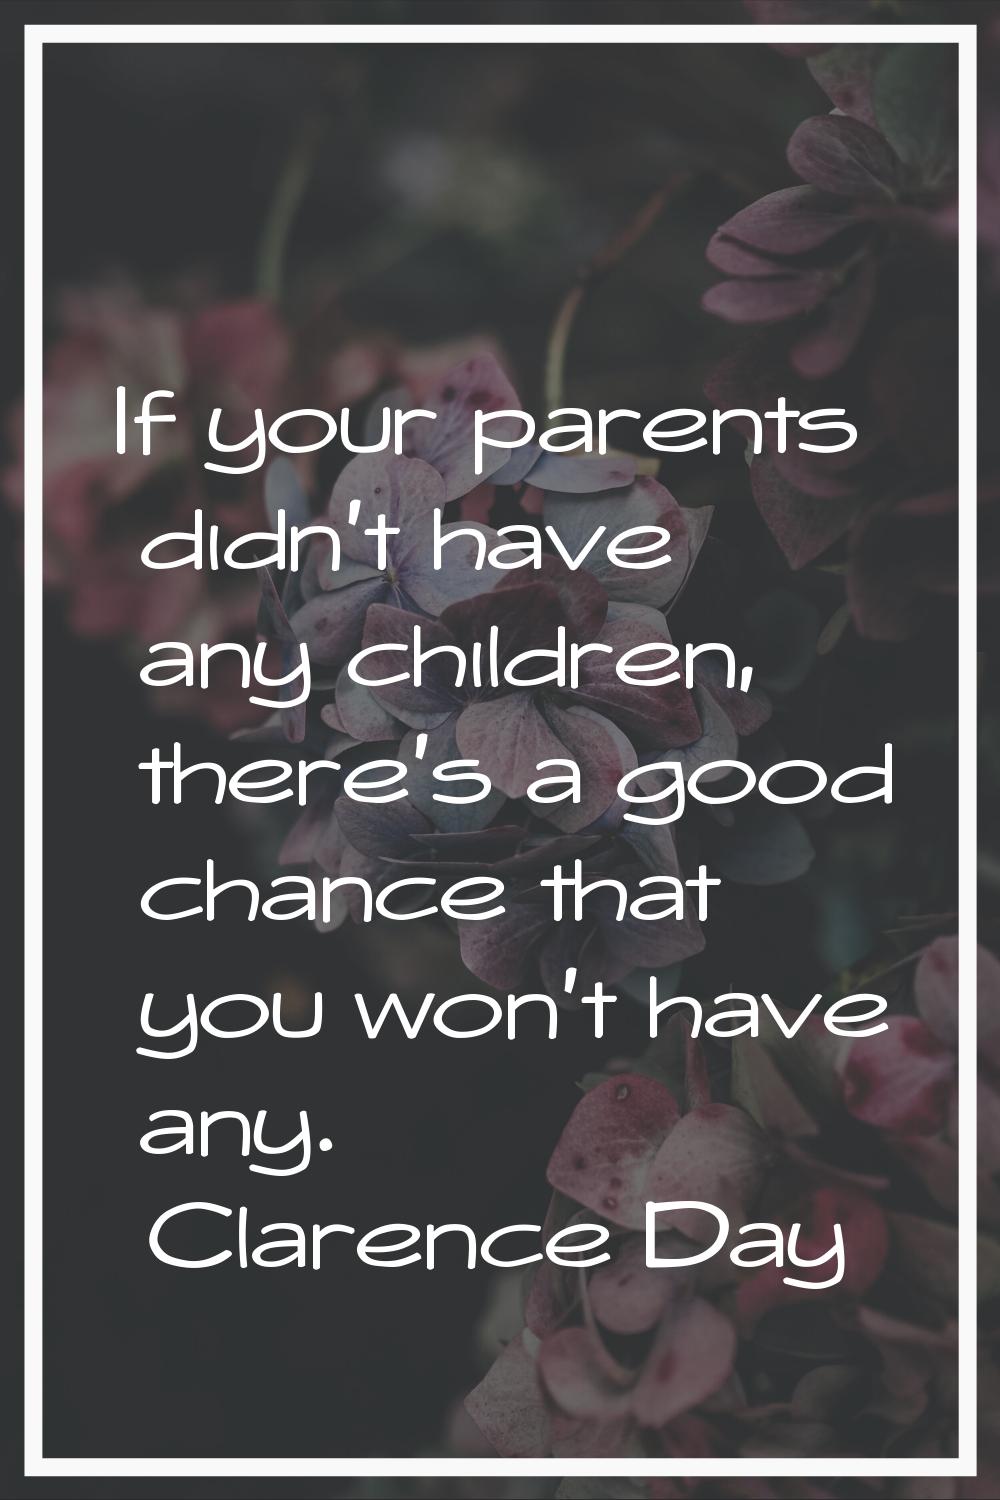 If your parents didn't have any children, there's a good chance that you won't have any.